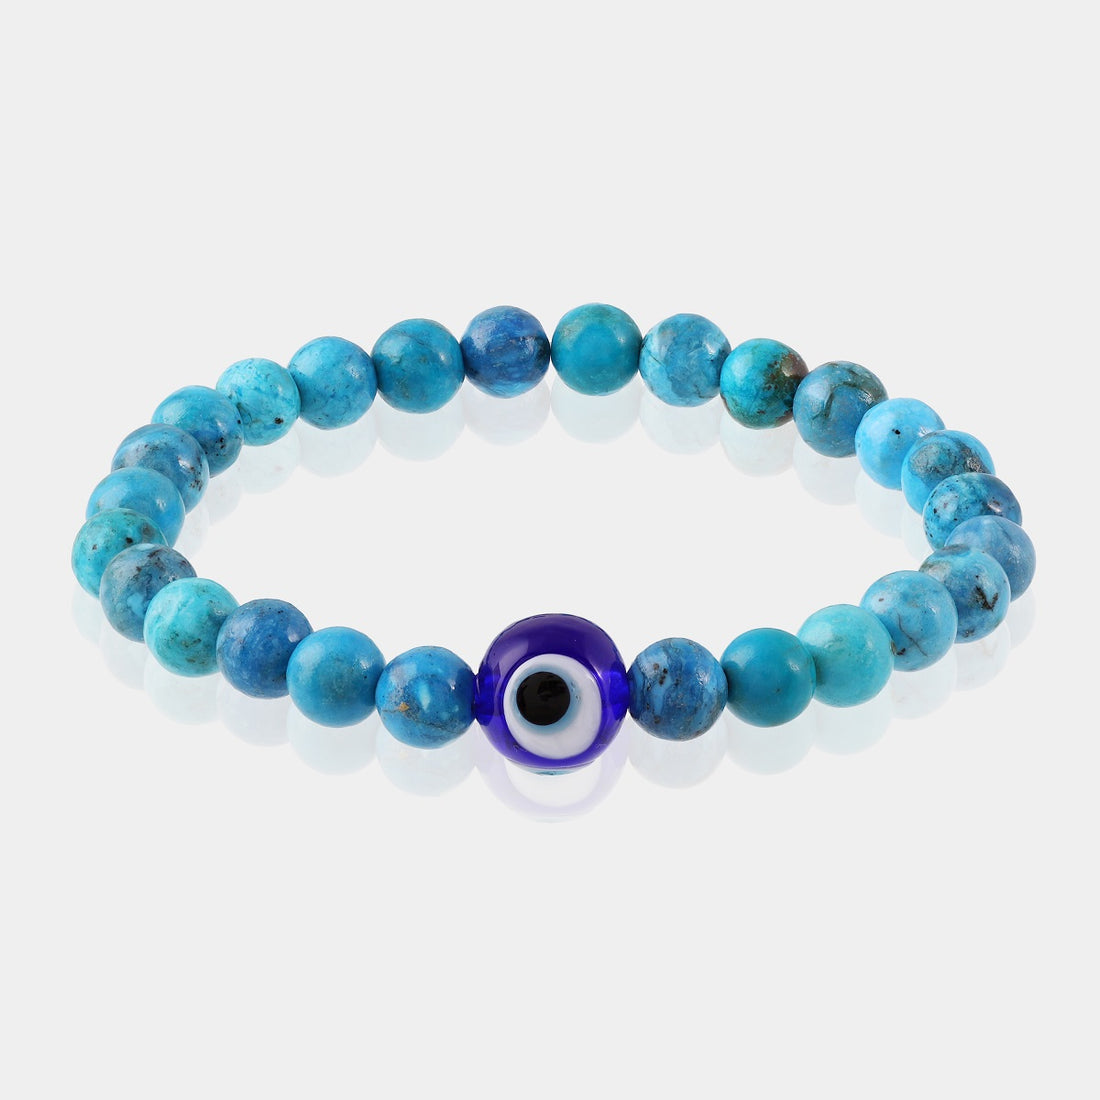  Smooth round beads in a soothing blue shade, radiating tranquility and fostering communication, adorning a stretch bracelet.